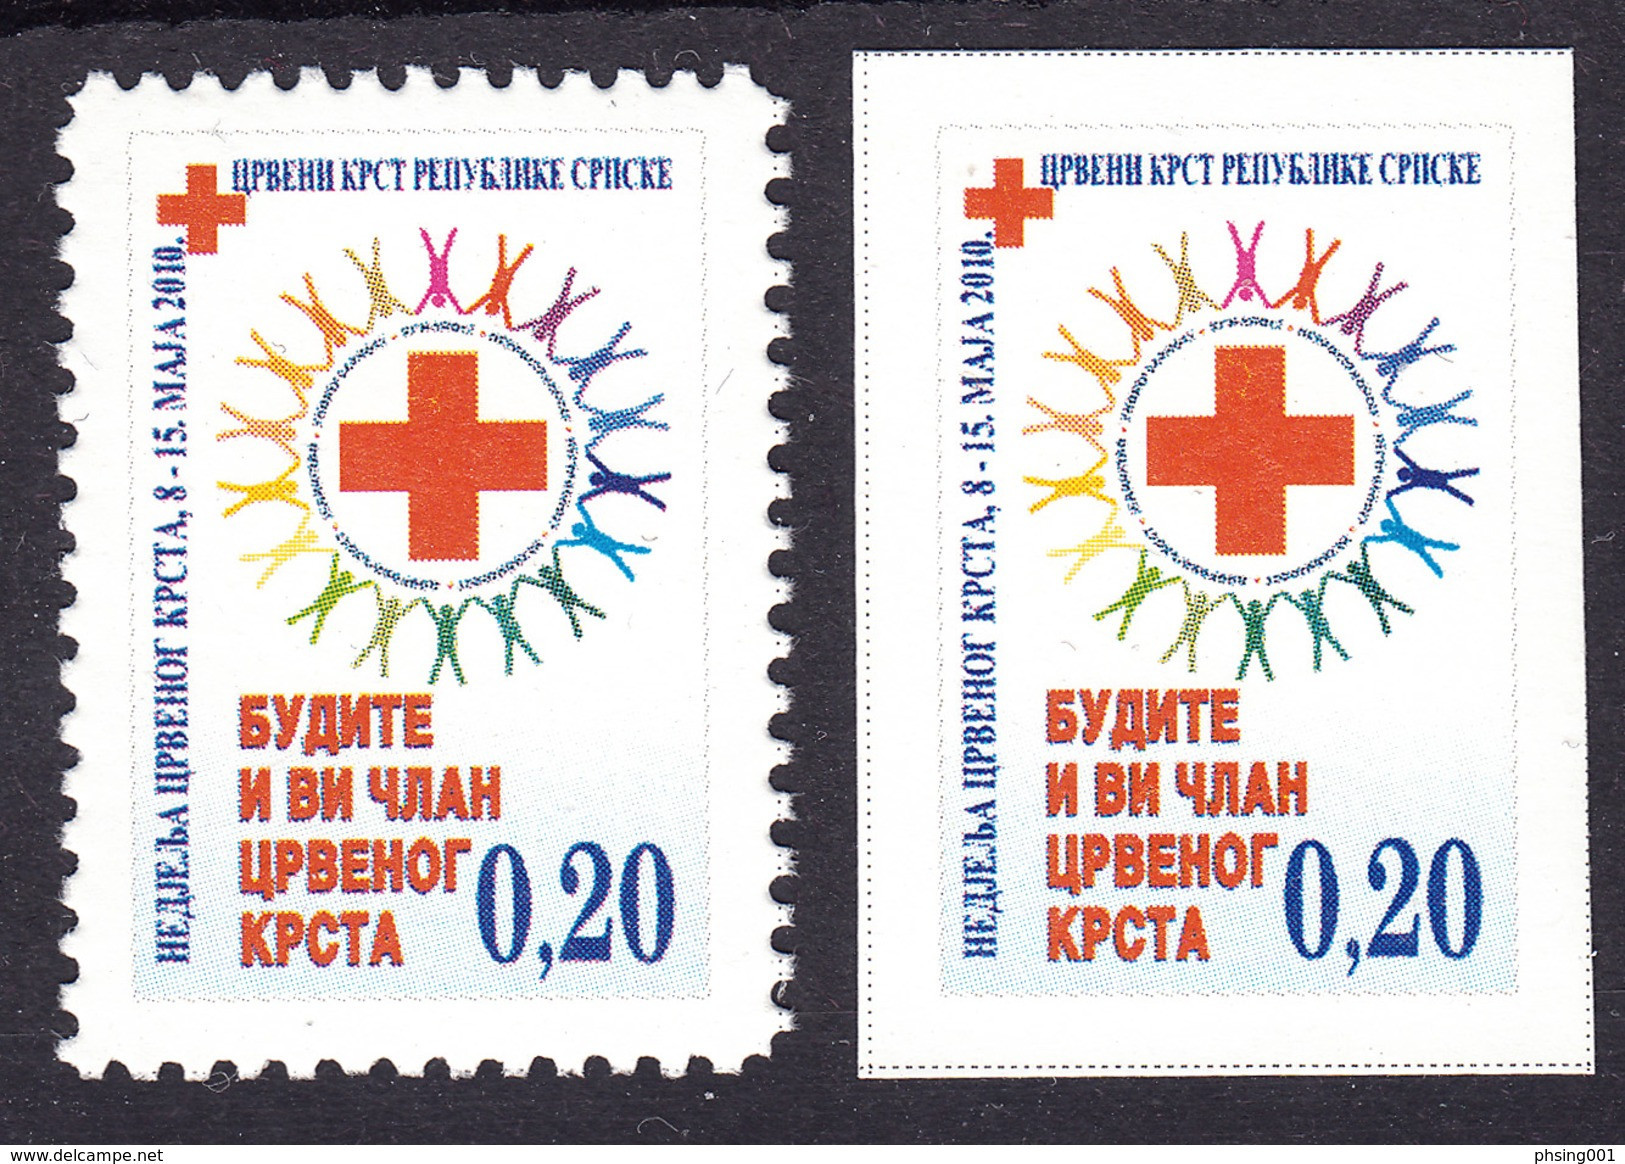 Bosnia Serbia 2010 Red Cross Rotes Kreuz Croix Rouge, Perforated + Imperforated, Tax, Charity, Surcharge Stamps MNH - Bosnie-Herzegovine